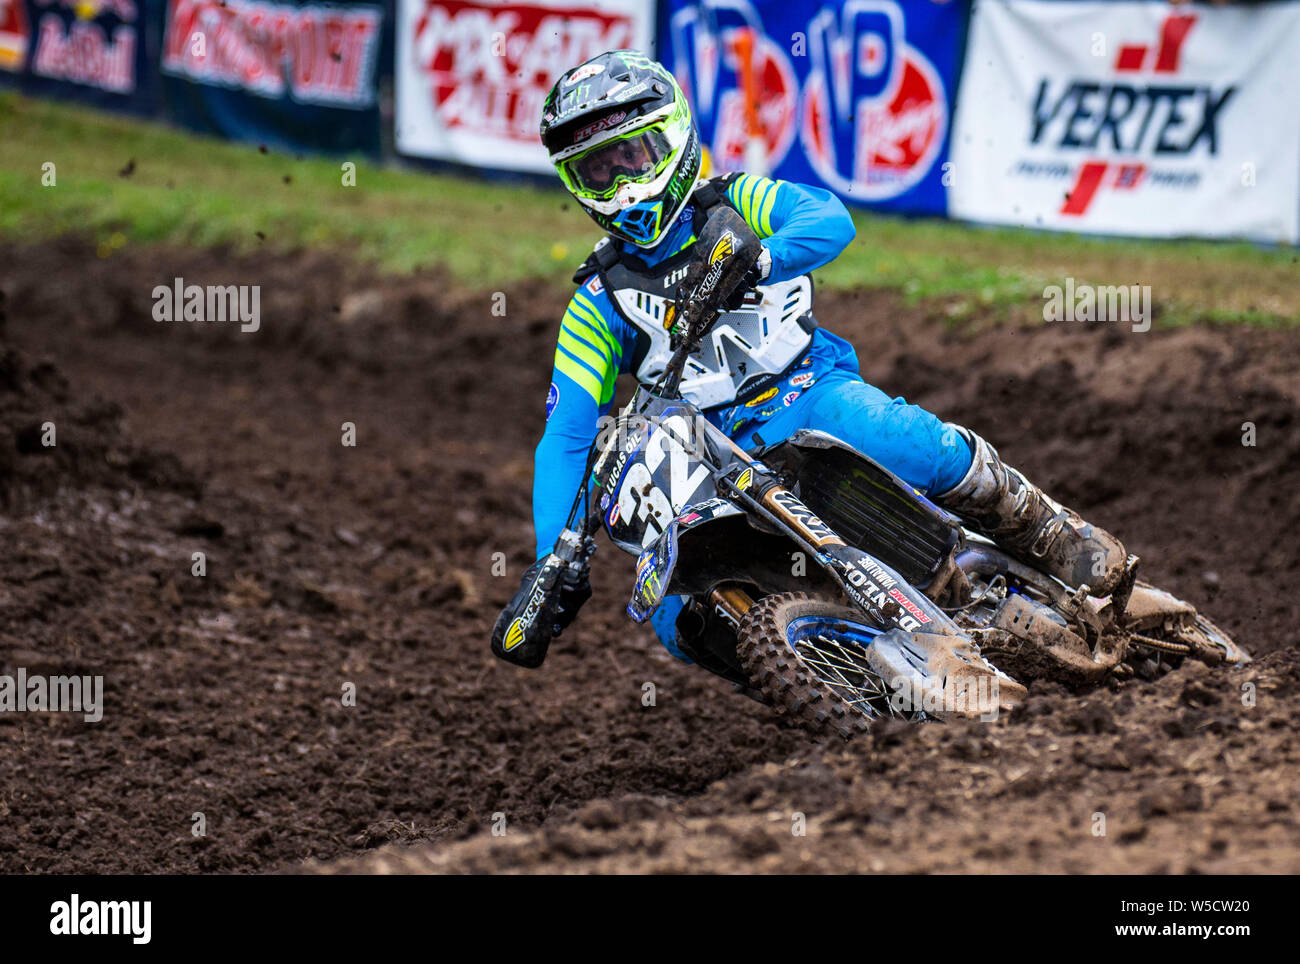 Washougal, USA. 27th July, 2019. # 32 Justin Cooper coming out of turn12 during the Lucas Oil Pro Motocross Washougal Championship 250 class moto # 1 at Washougal MX park Washougal, WA Thurman James/CSM/Alamy Live News Stock Photo